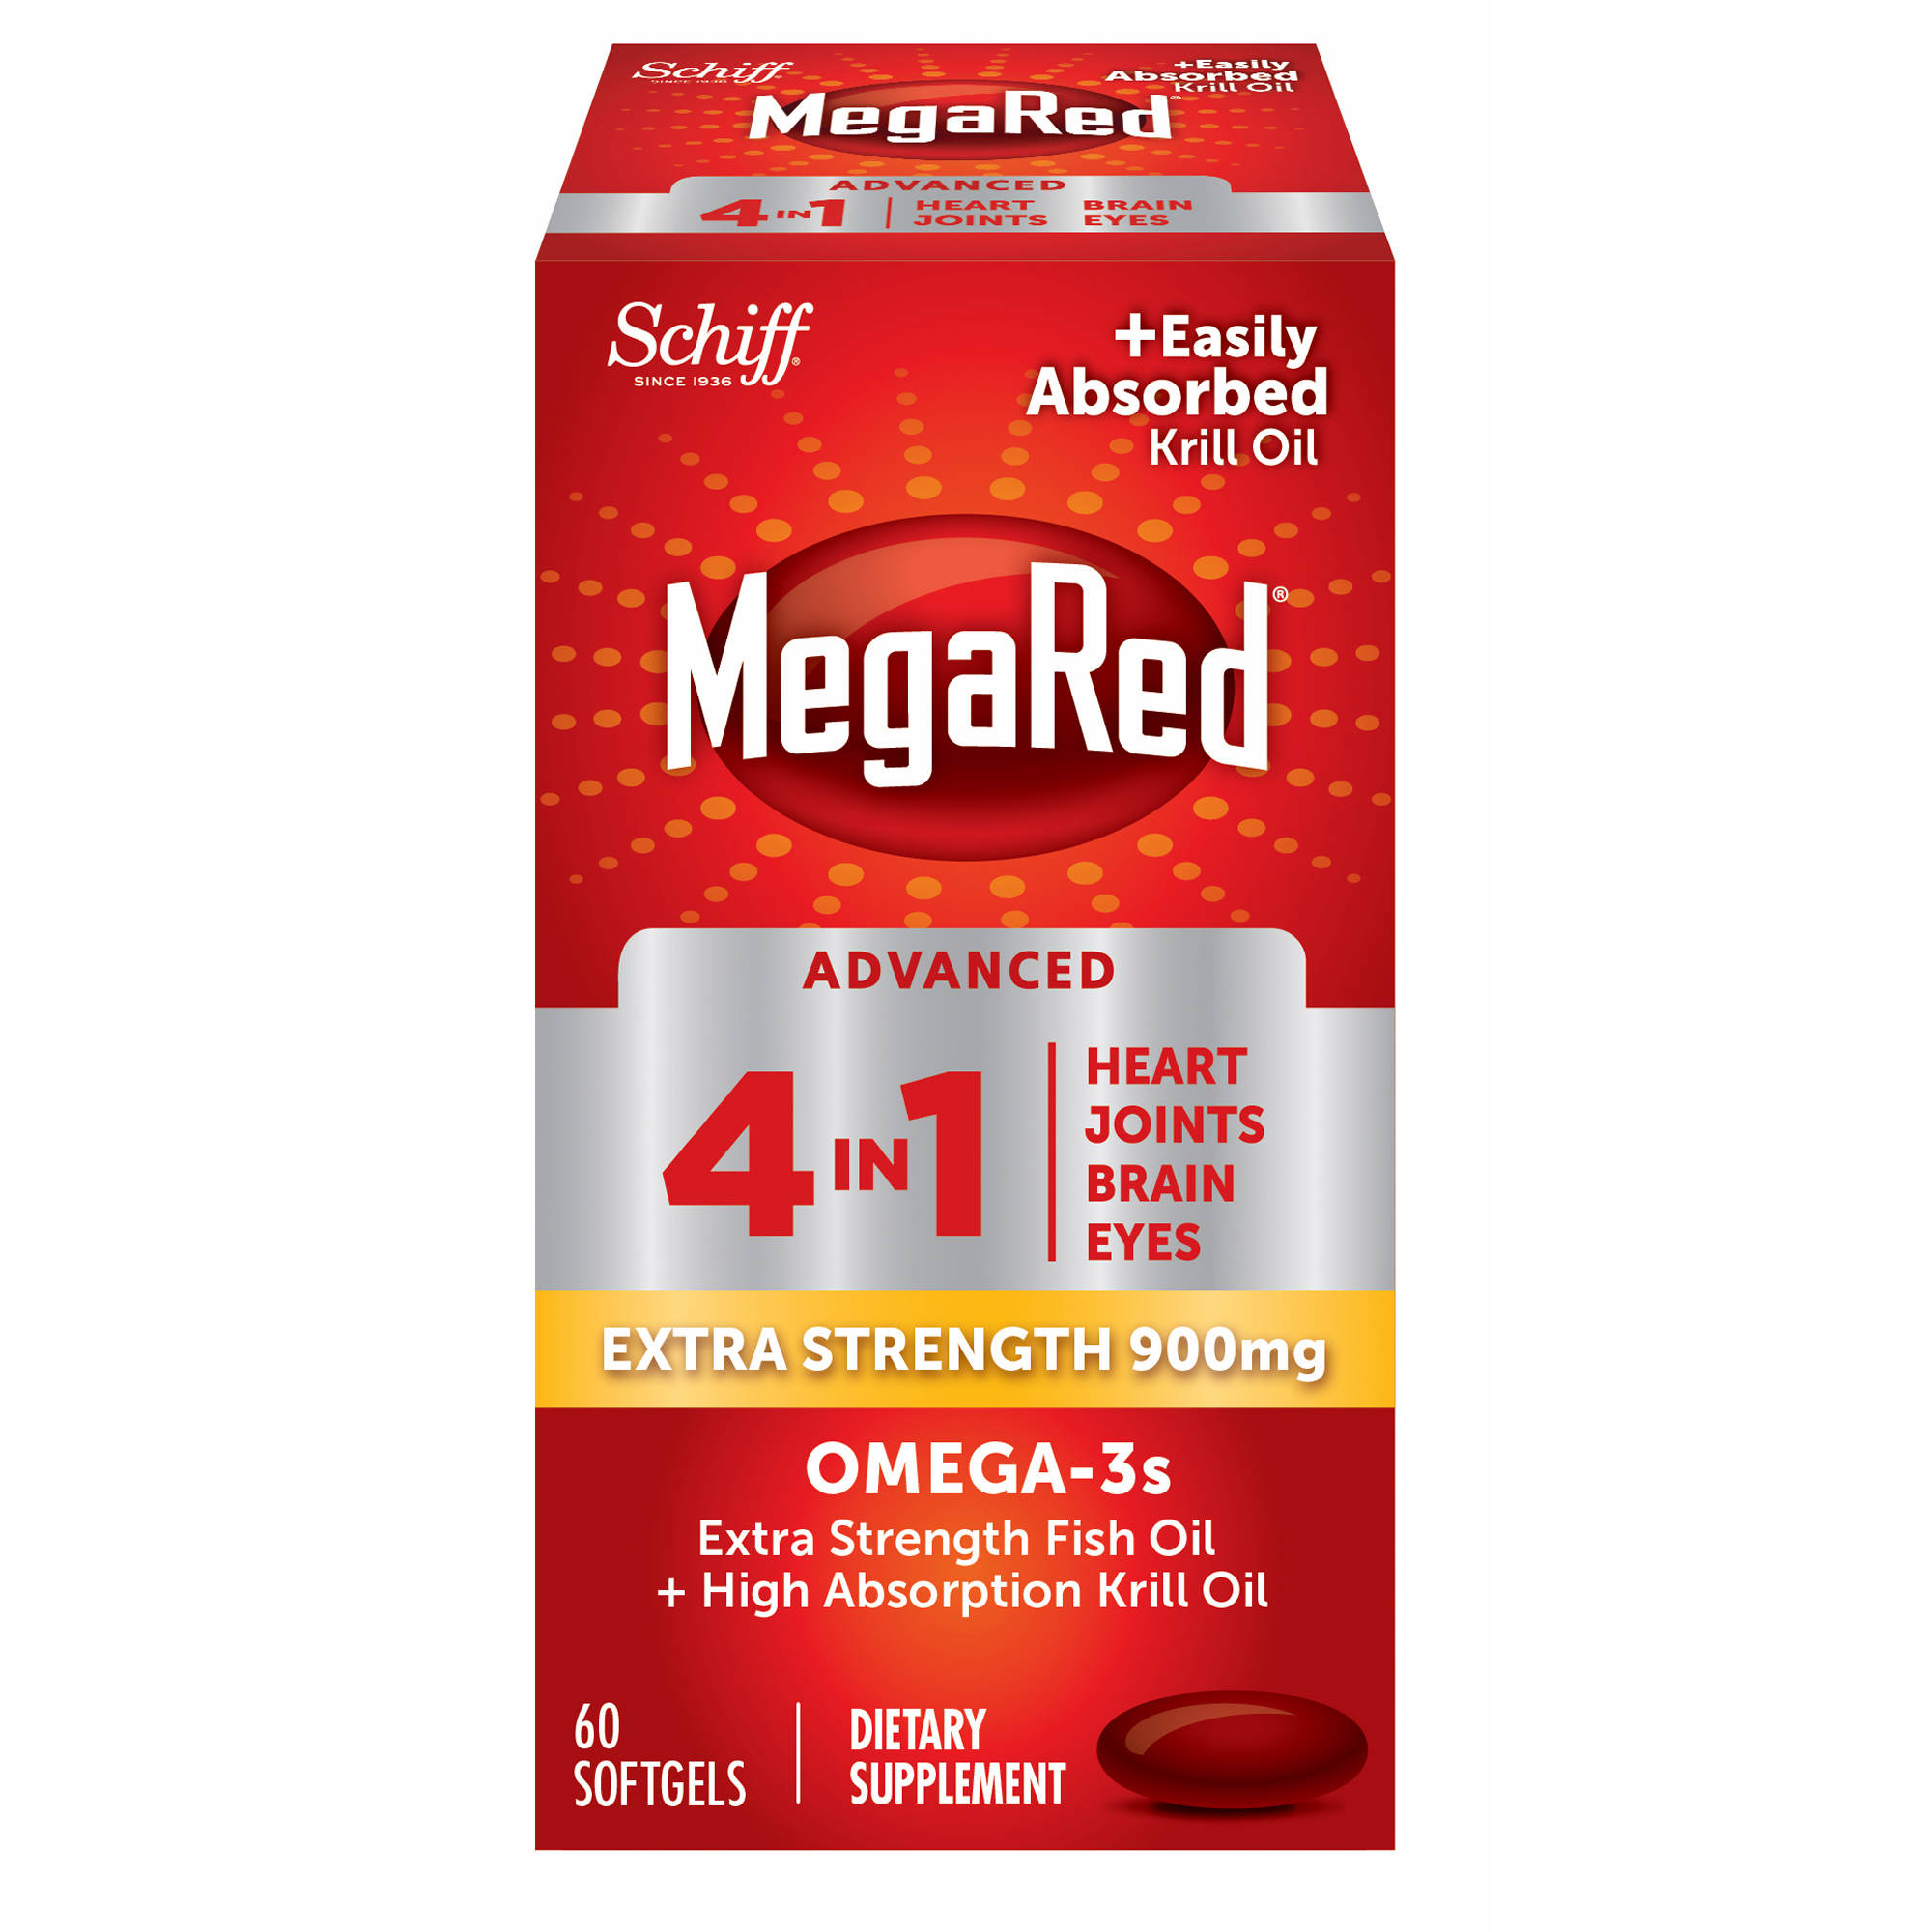 What is MegaRed Krill Oil?